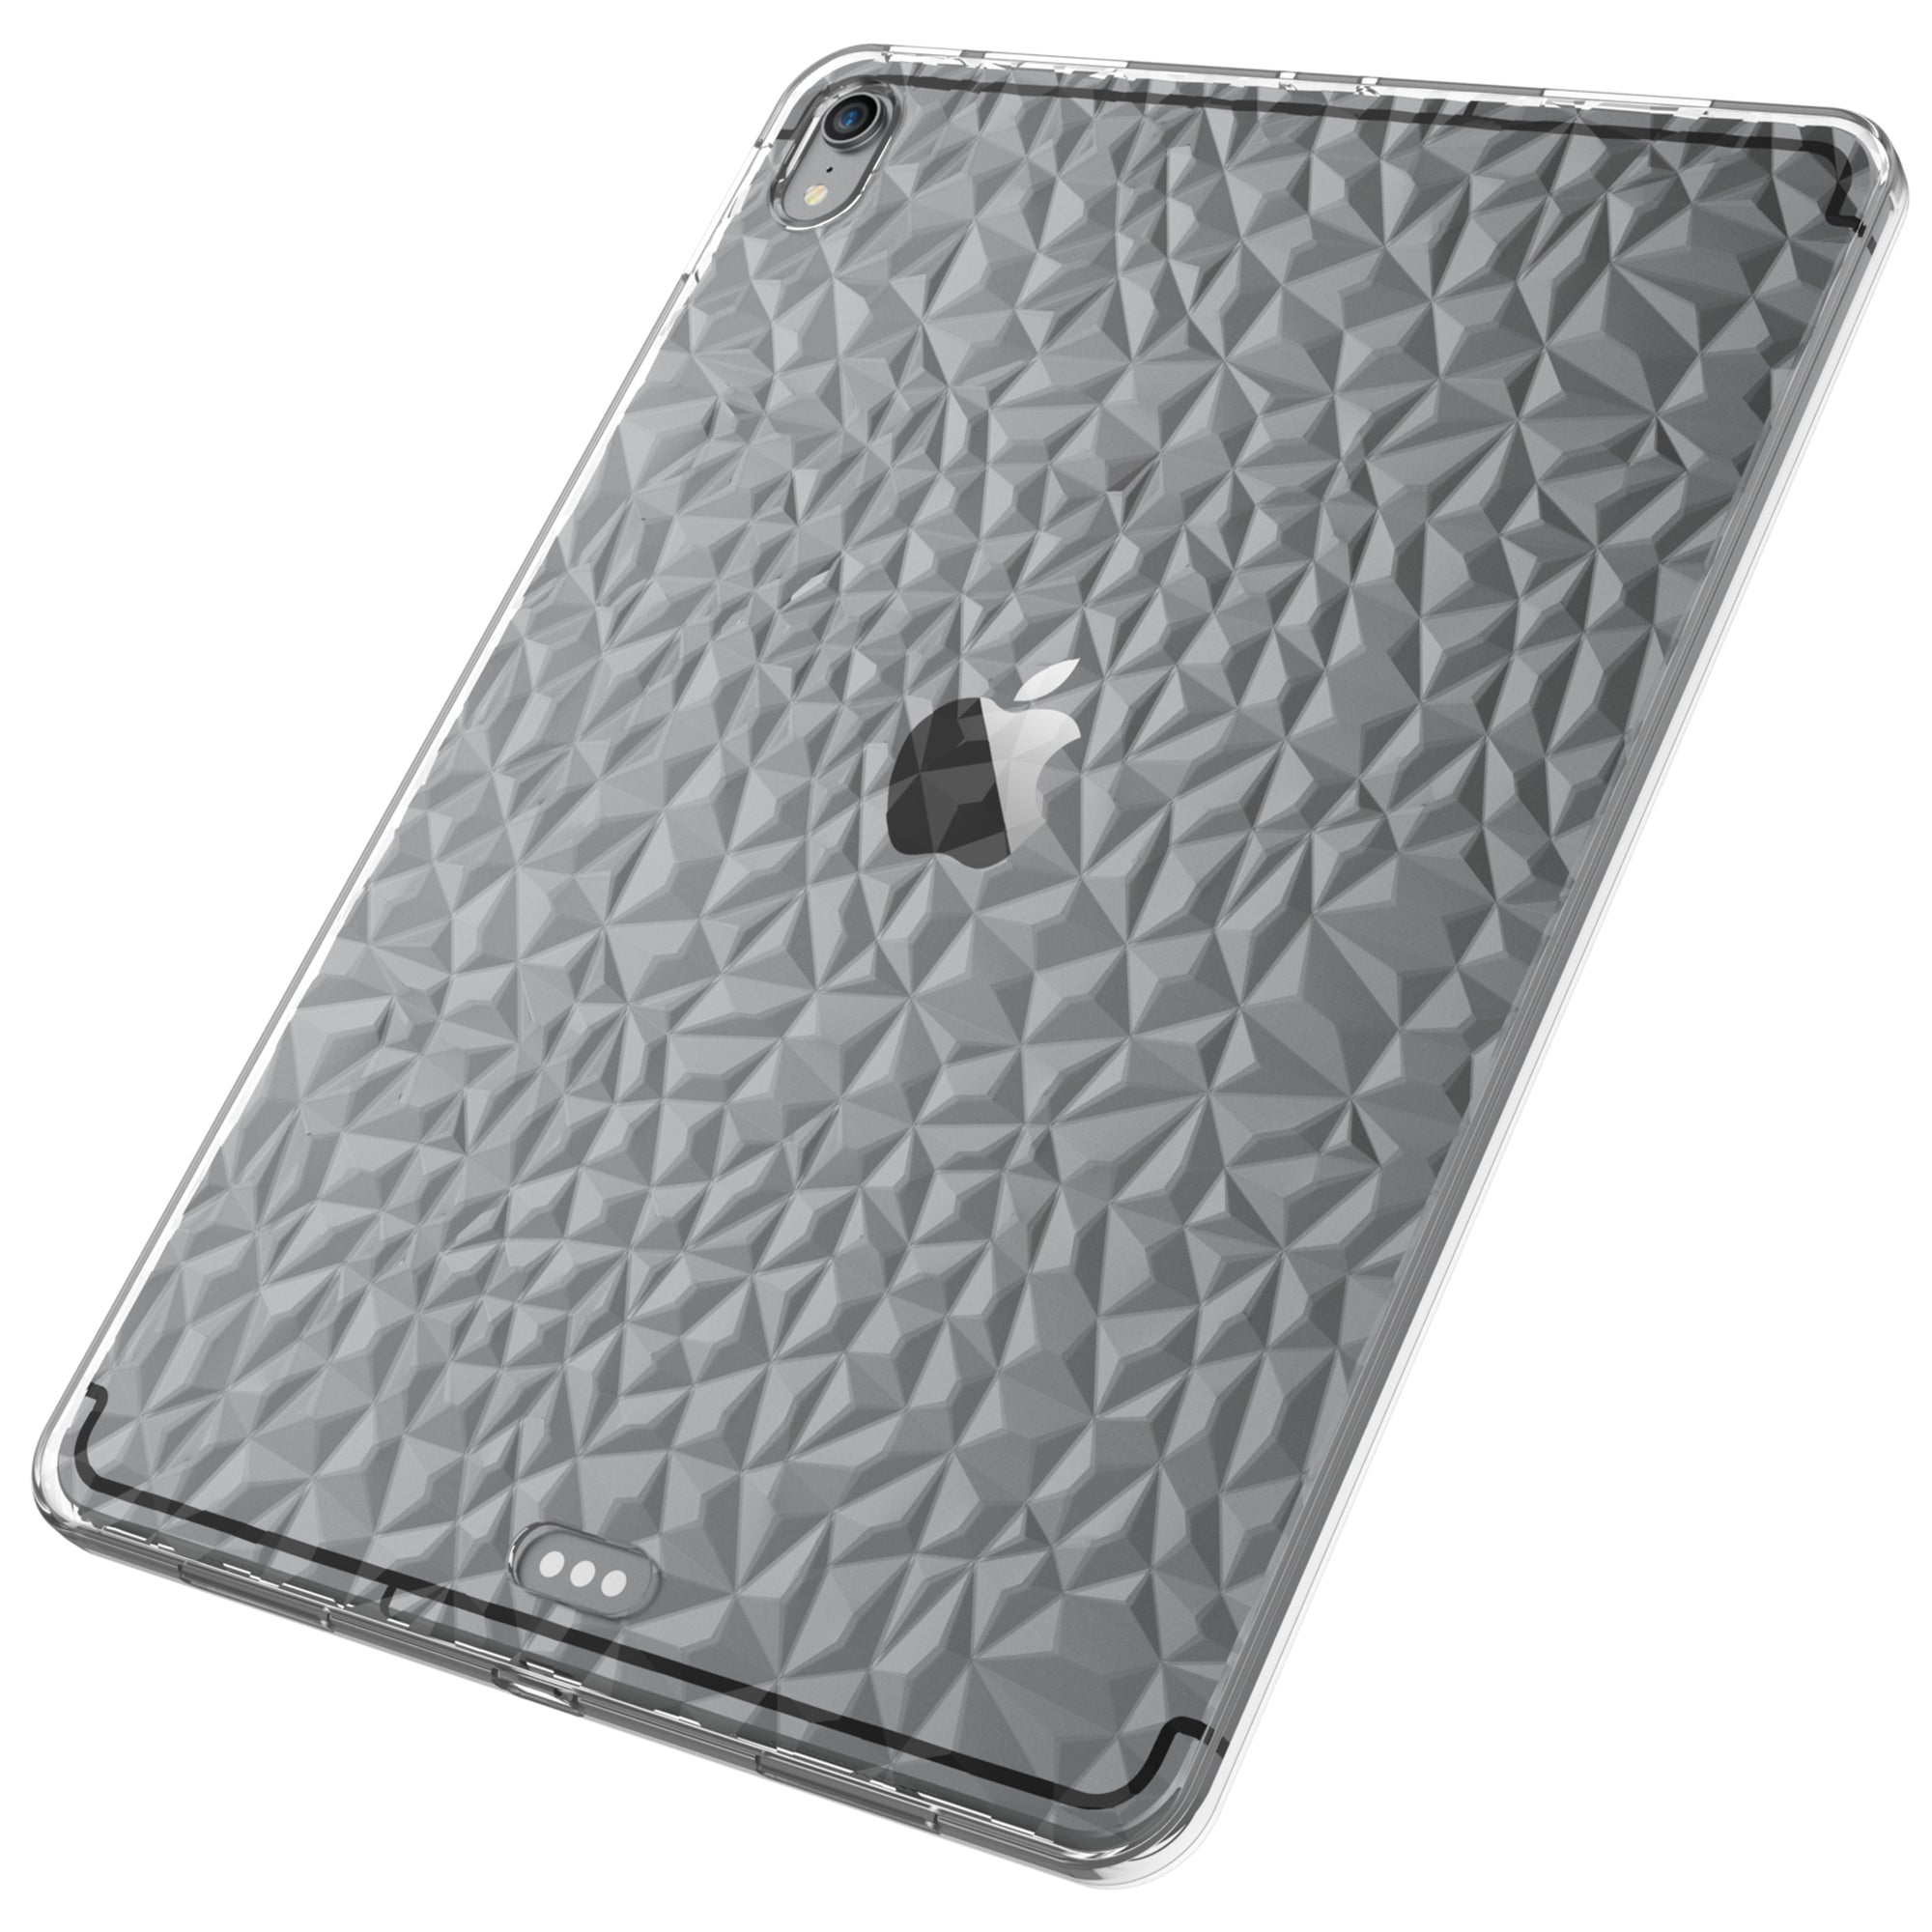 Luvvitt iPad Pro 11 Case CLEAR DIAMOND TPU Flexible Back Cover for 2018 - Clear